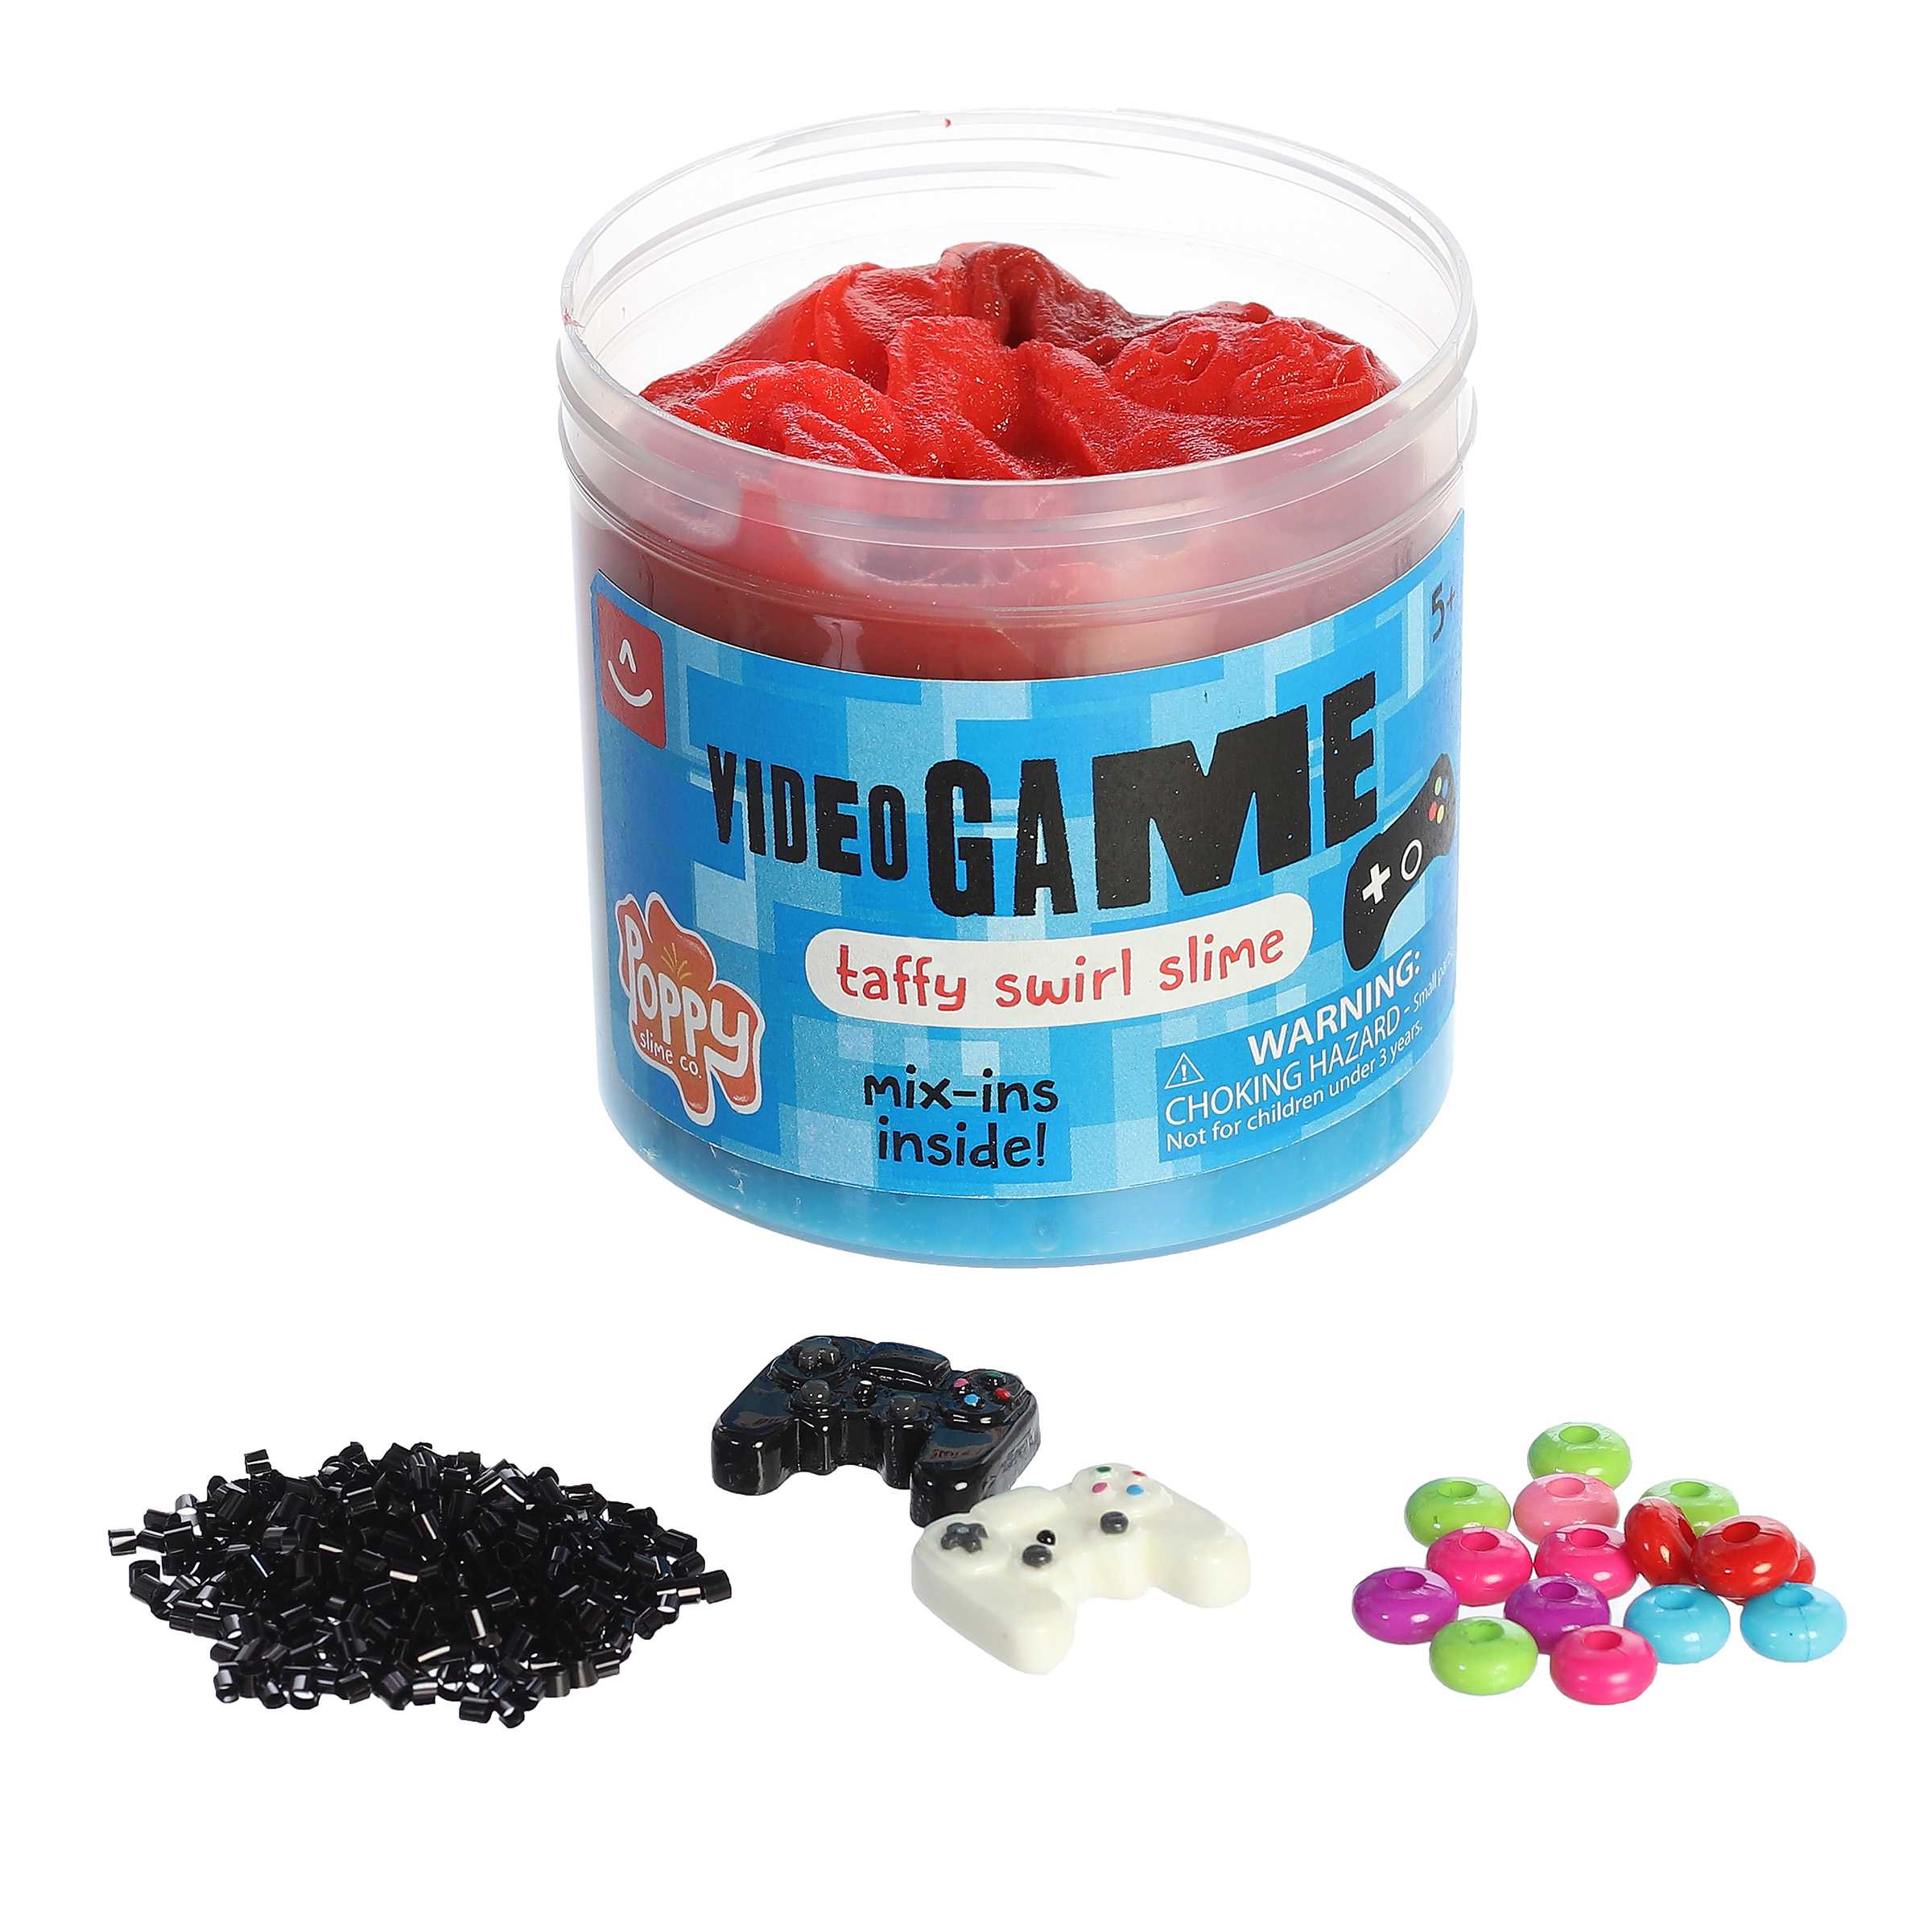 Video Game Slime, approx. 11.3 oz, in red and blue with gaming-themed mix-ins